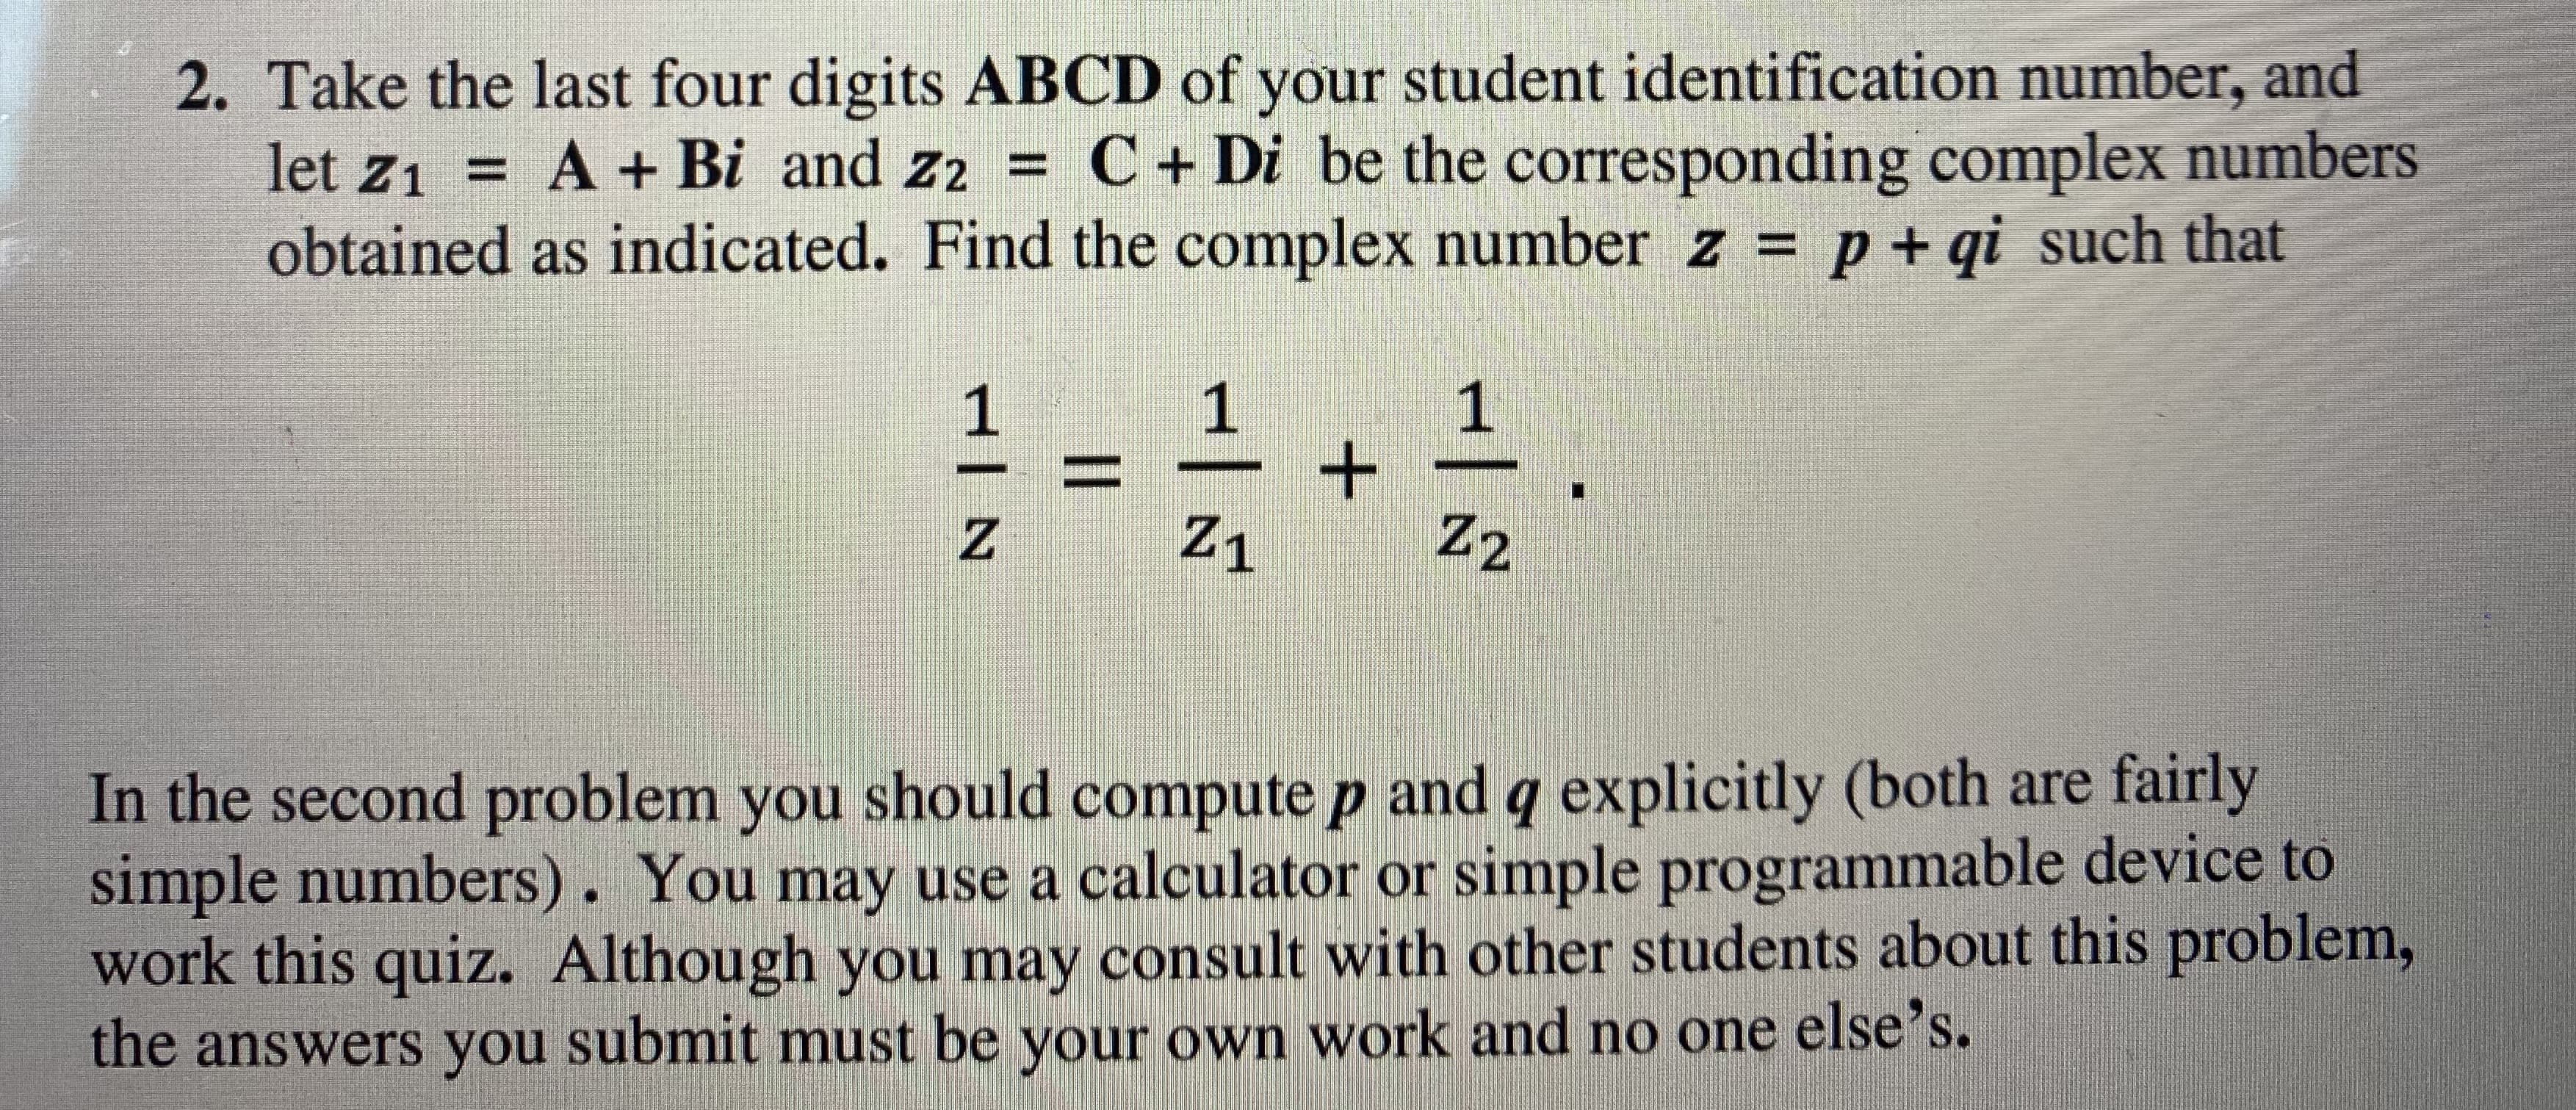 Take the last four digits ABCD of your student identification number, and
let z1 = A + Bi and z2 = C + Di be the corresponding complex numbers
obtained as indicated. Find the complex number z = p + qi such that
%3D
